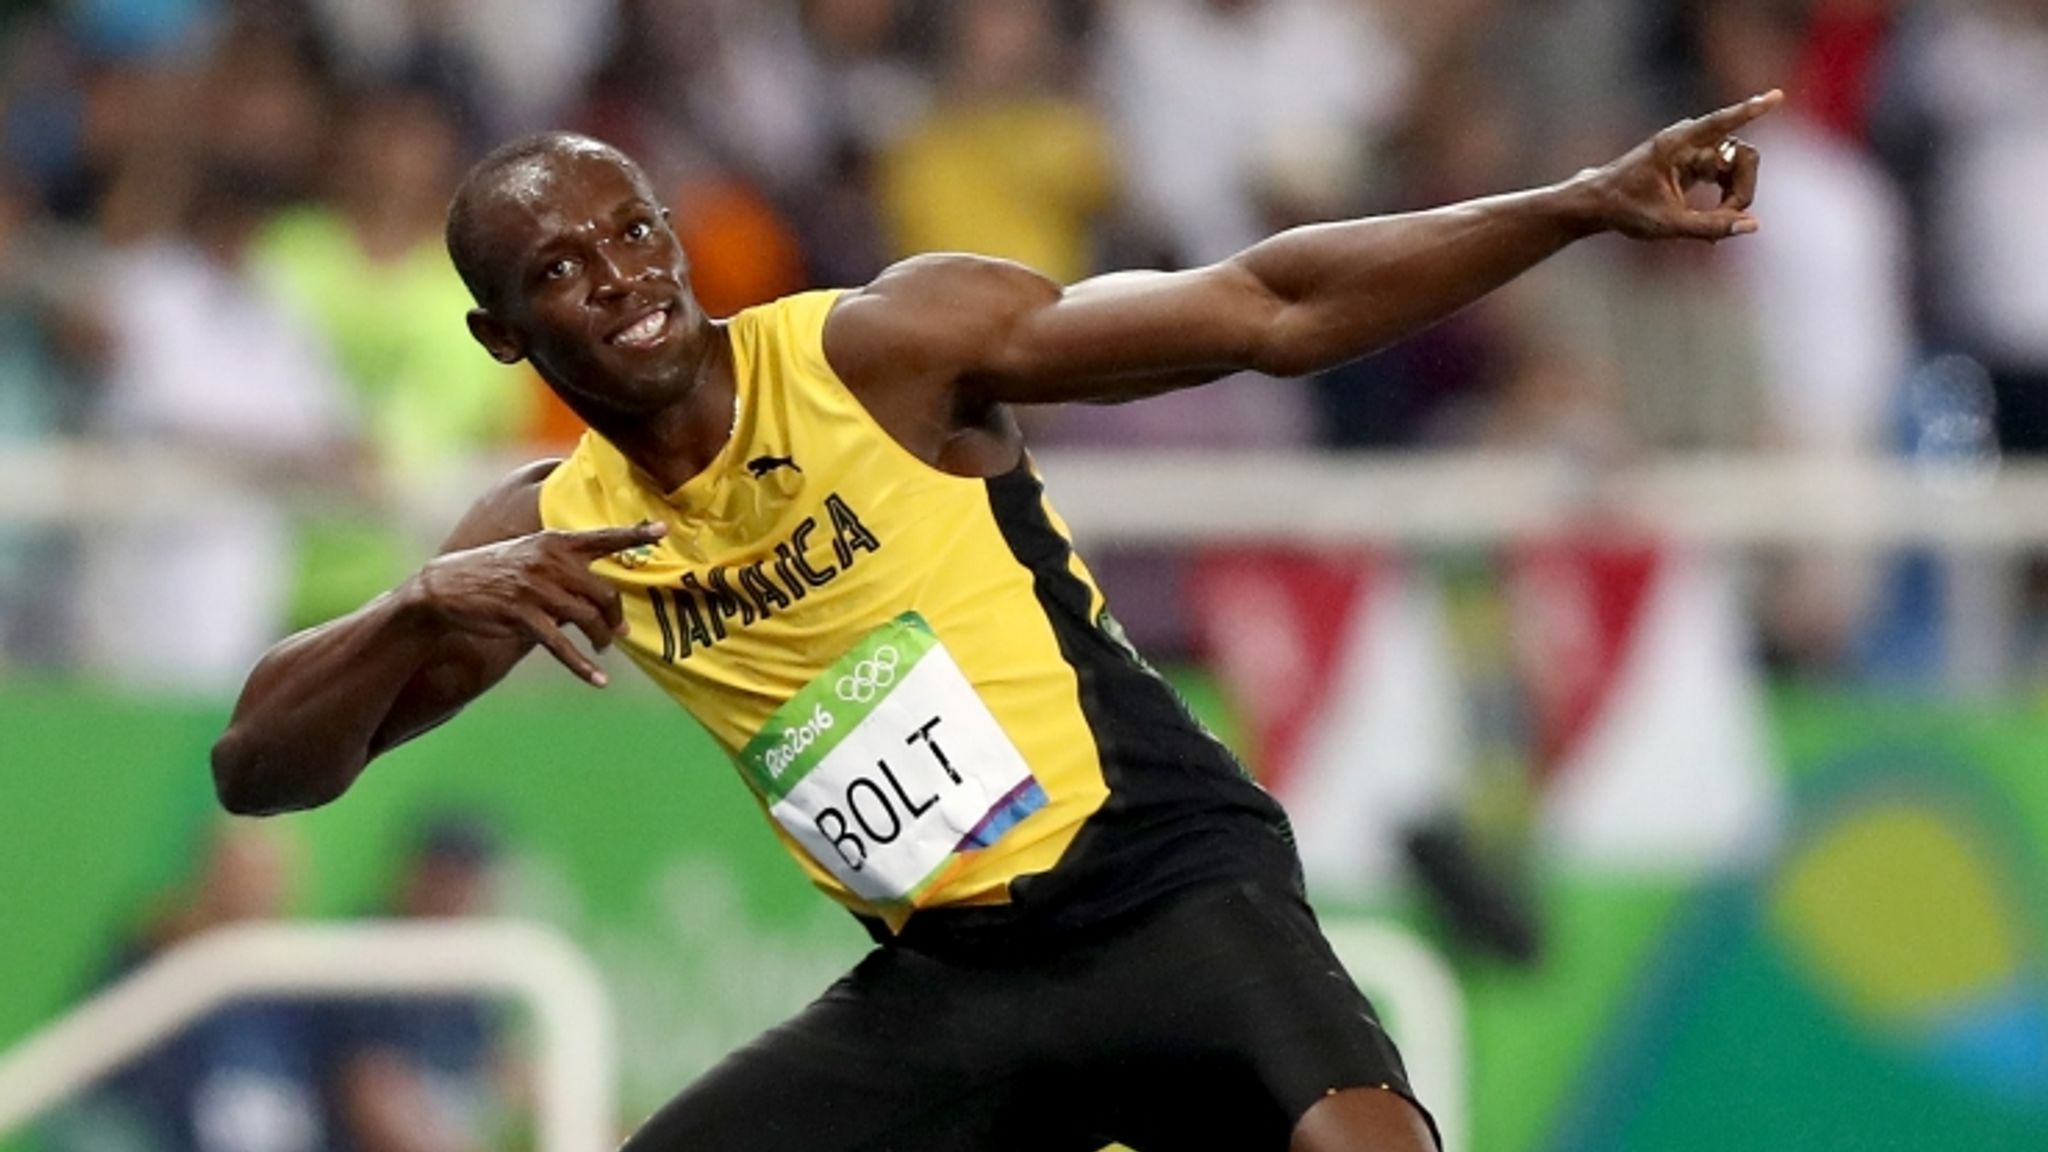 Bolt to trademark victory pose